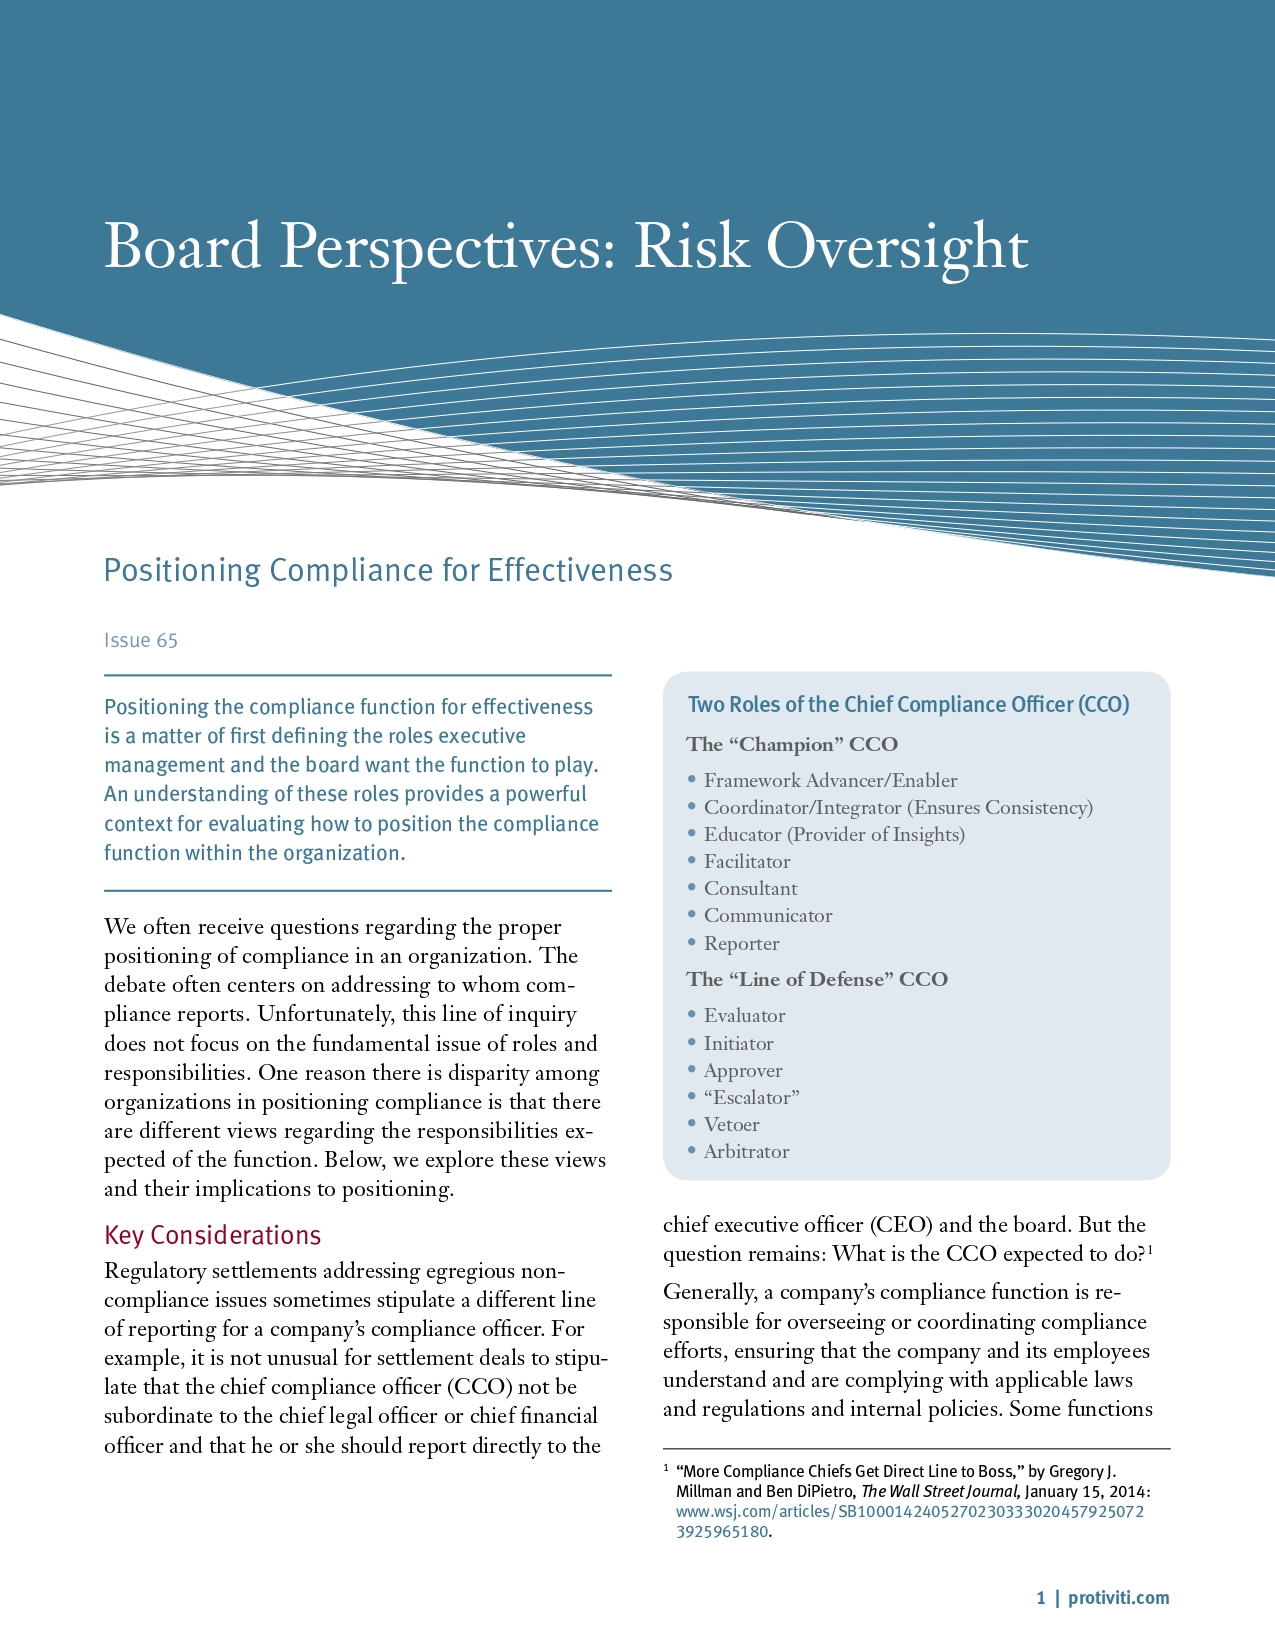 Screenshot of the first page of Positioning Compliance for Effectiveness